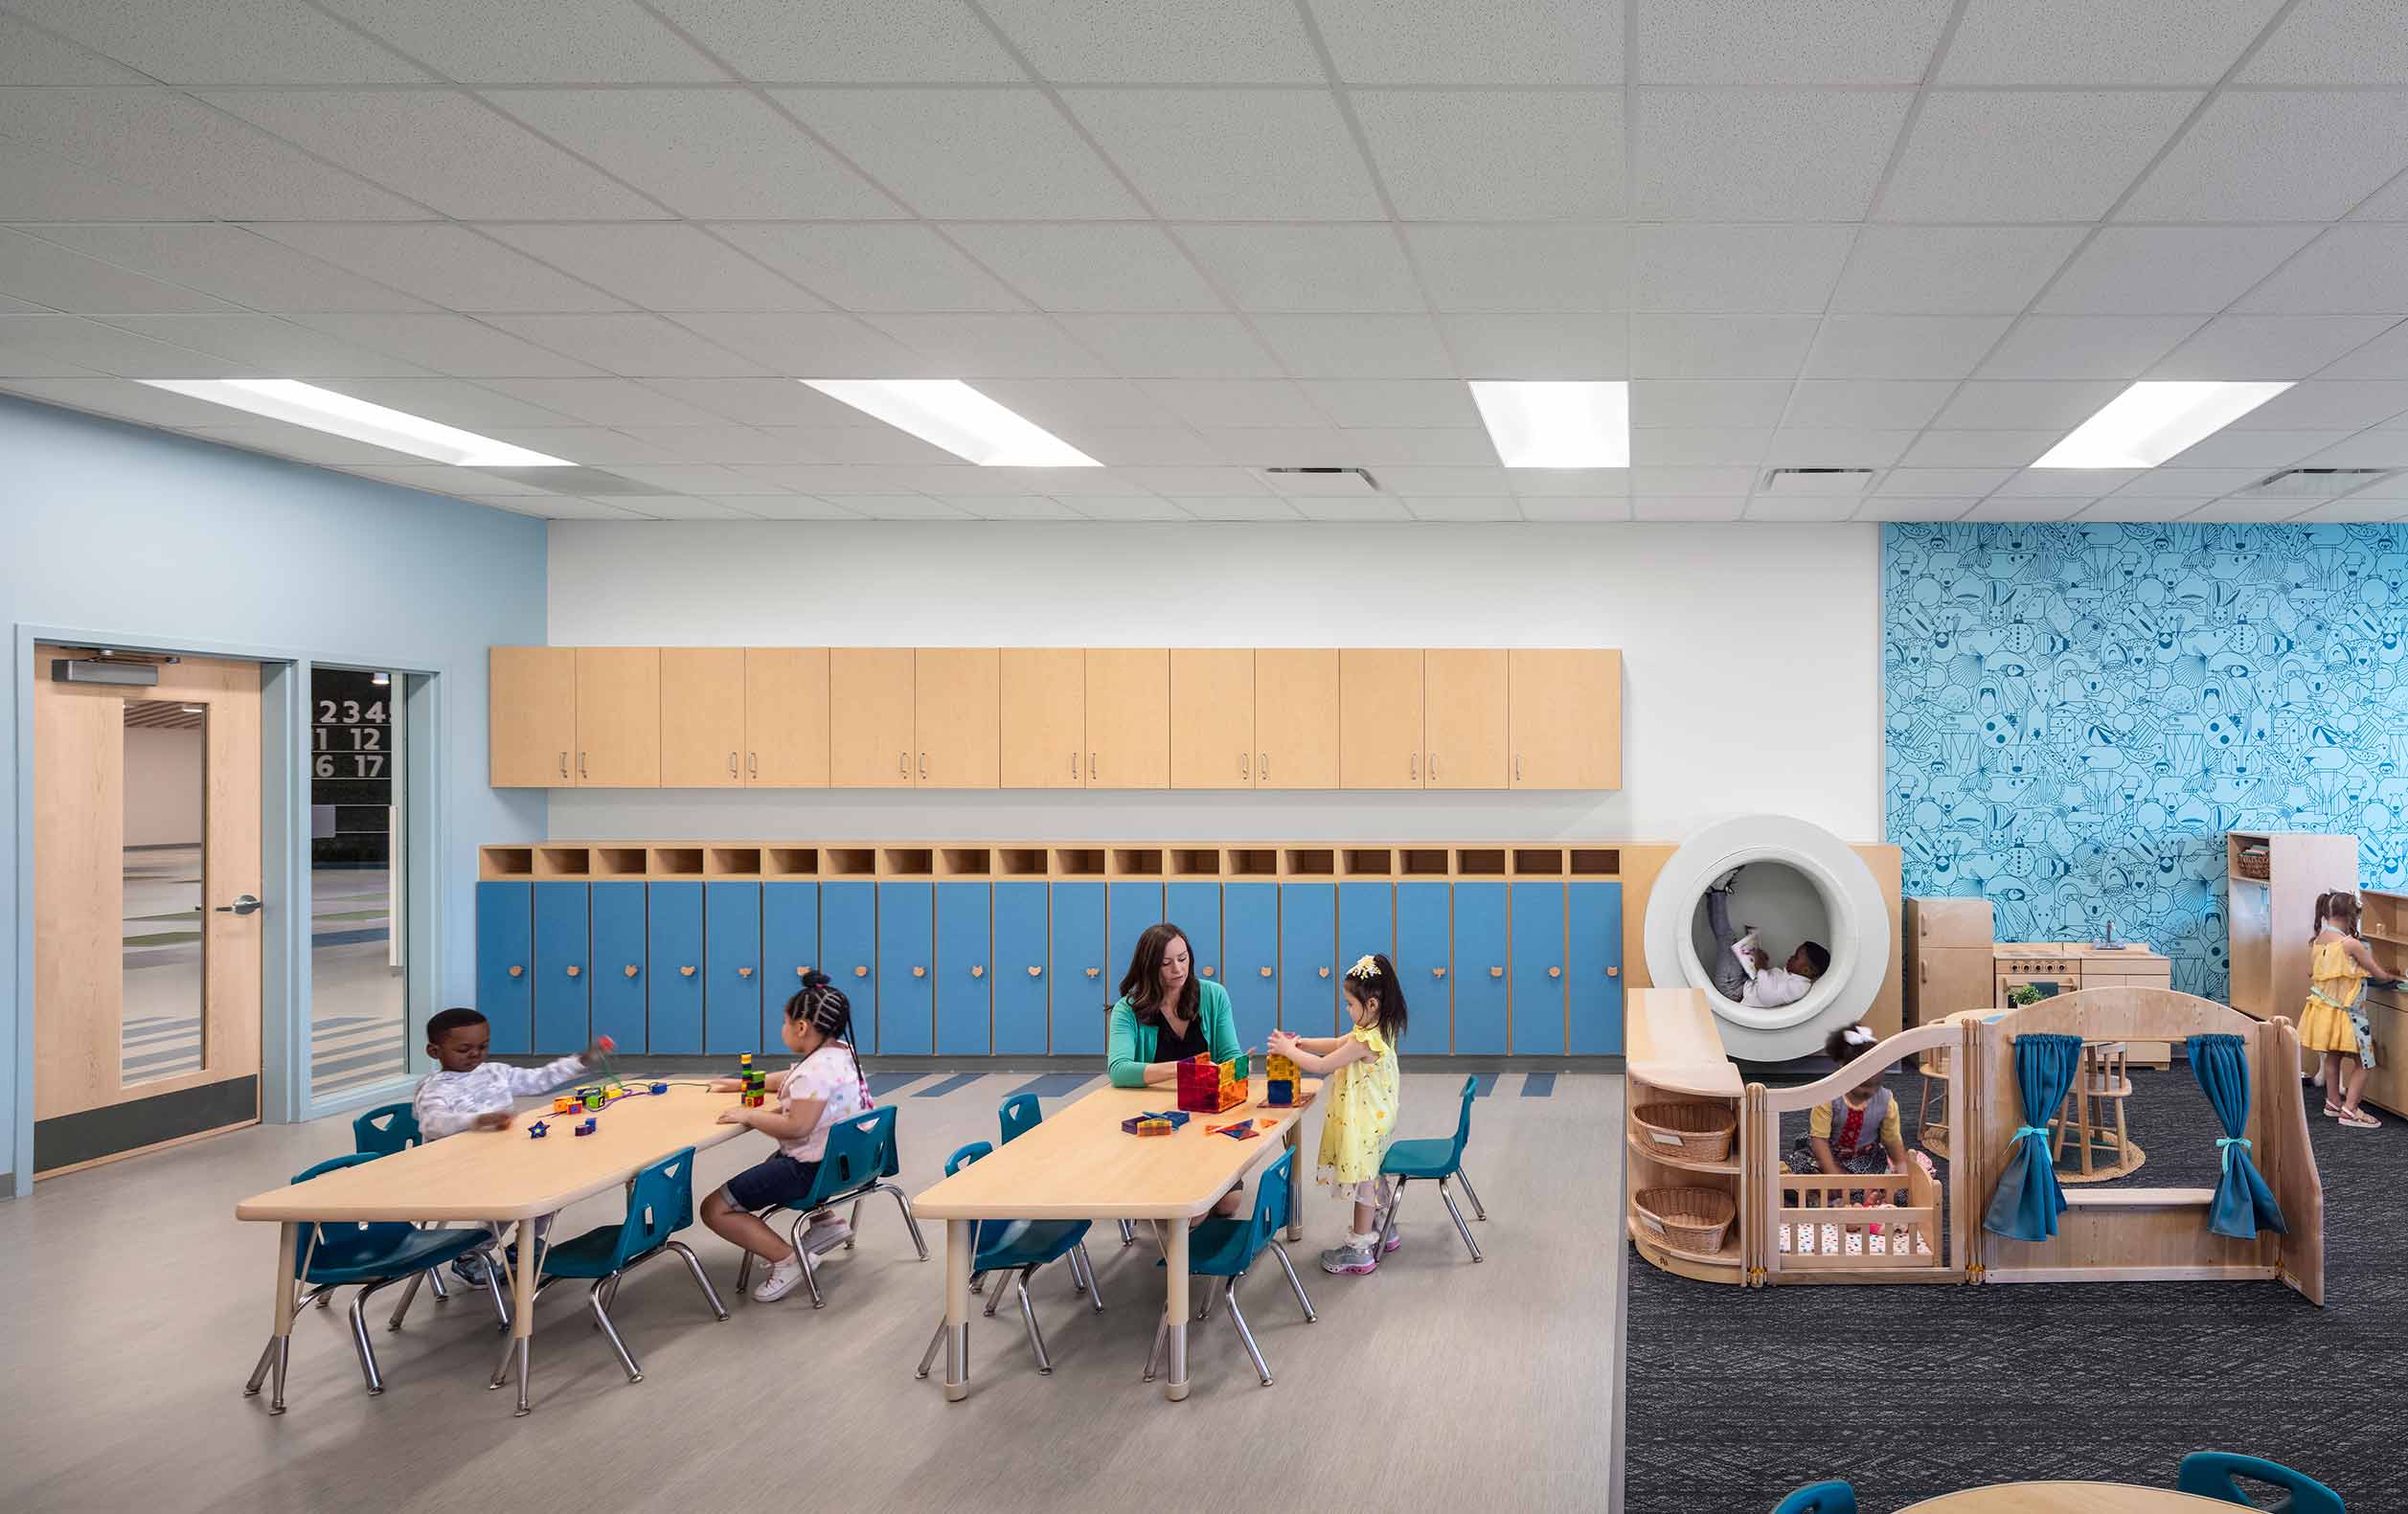 Preschool classroom with teacher and students, and student sitting in hole built into wall